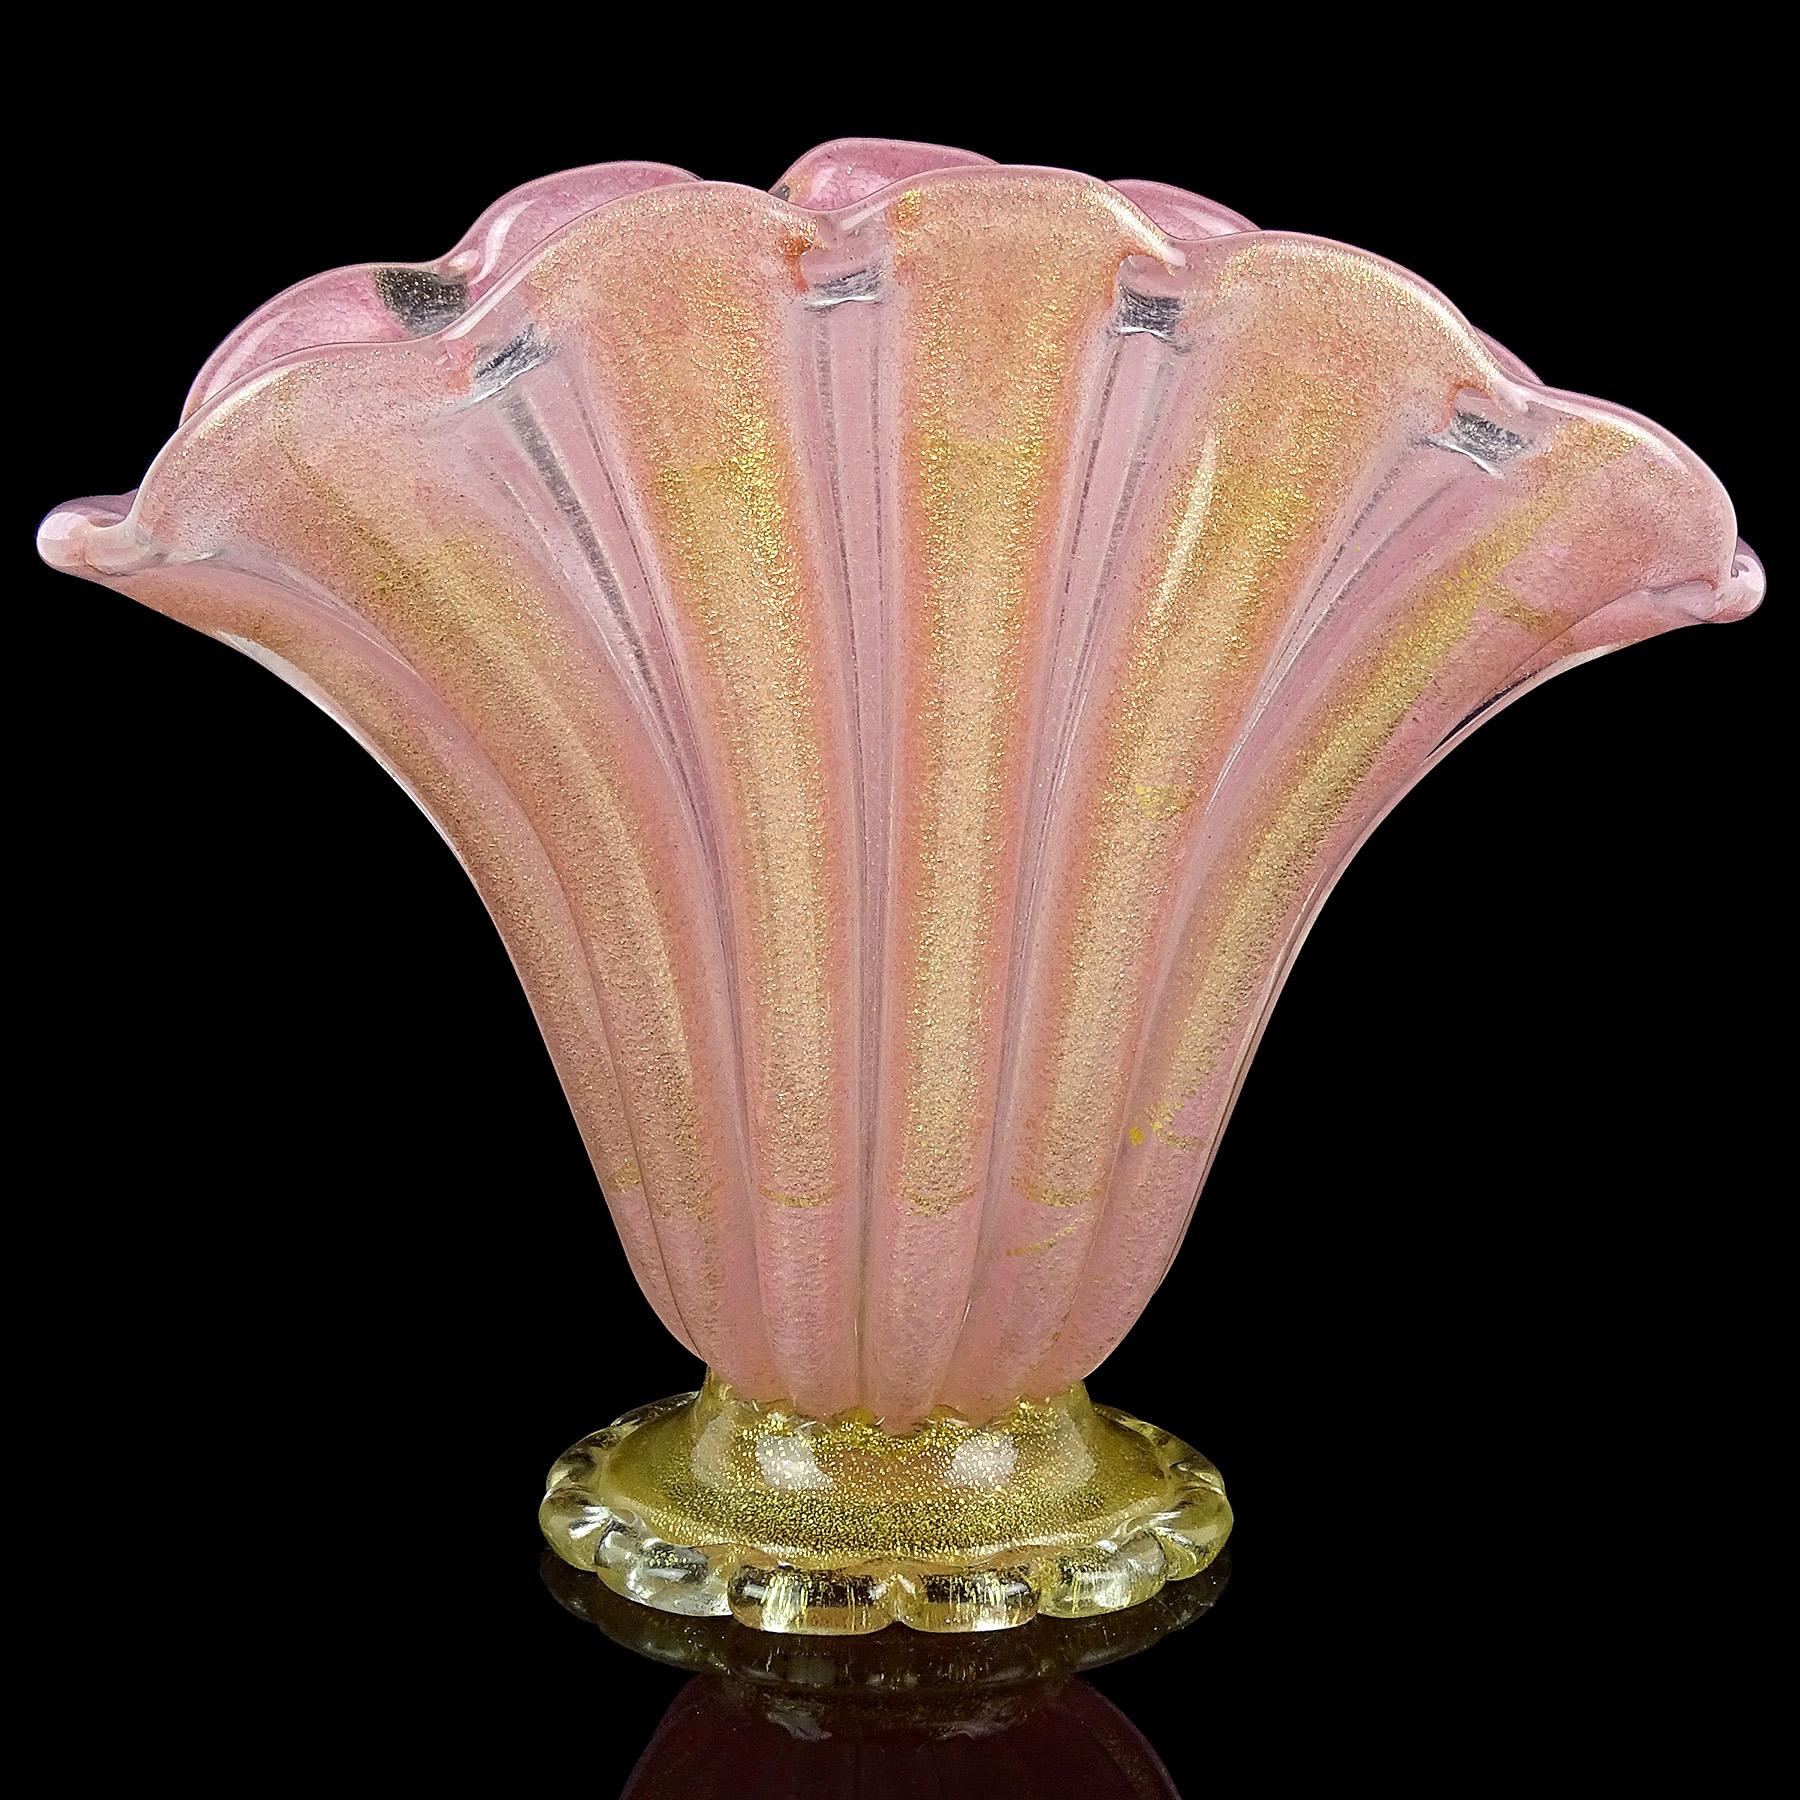 Gorgeous vintage Murano hand blown pink and gold flecks Italian art glass footed fan shaped flower vase. Attributed to designer Ercole Barovier for the Barovier e Toso workshop. Created in the 